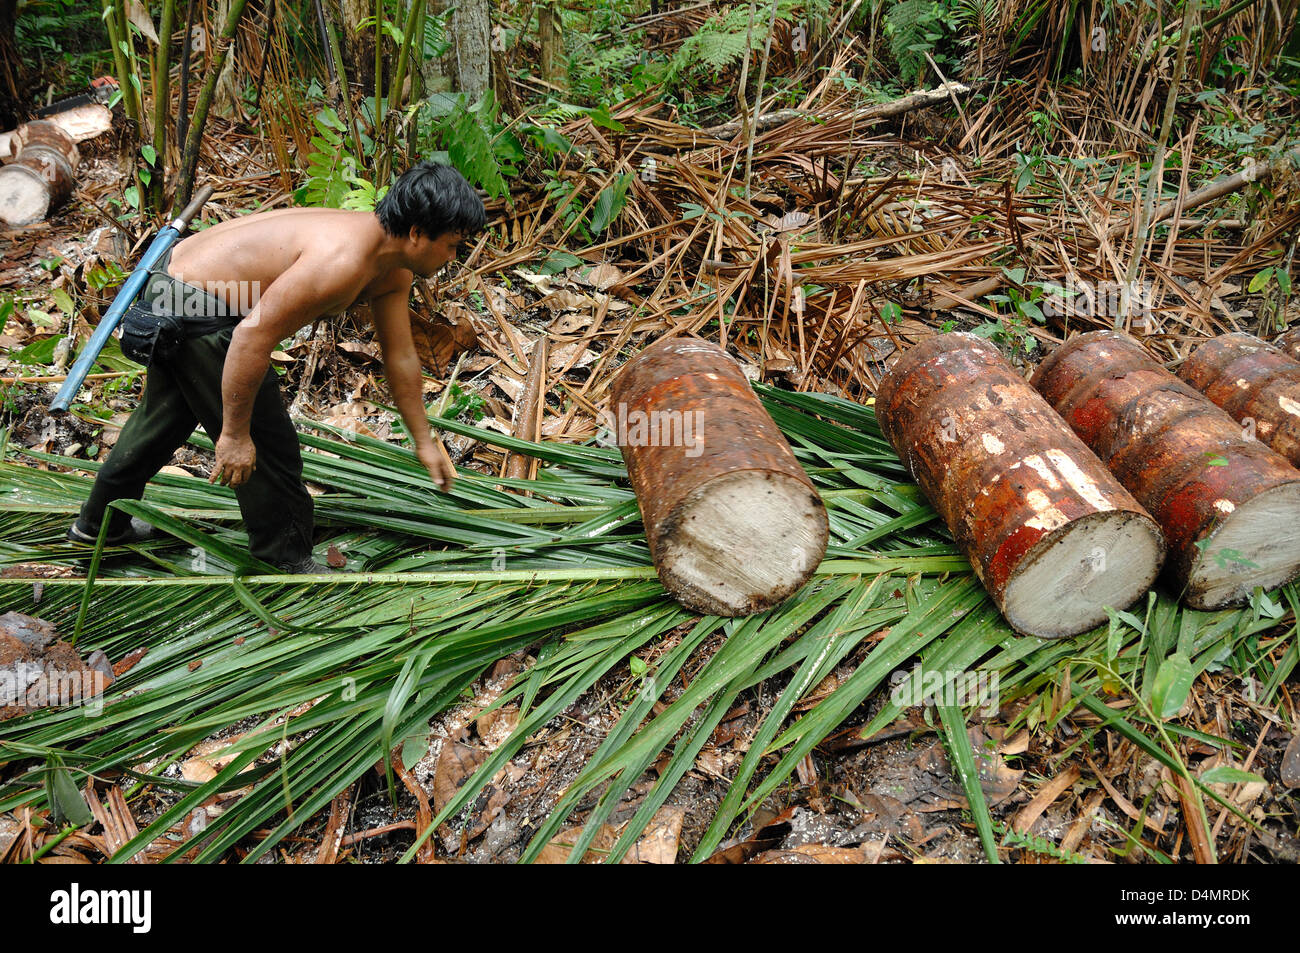 Forest Worker Cutting and Preparing Sago Palm Logs for the Extraction of Sago near Mukah Sarawak Borneo Malaysia Stock Photo